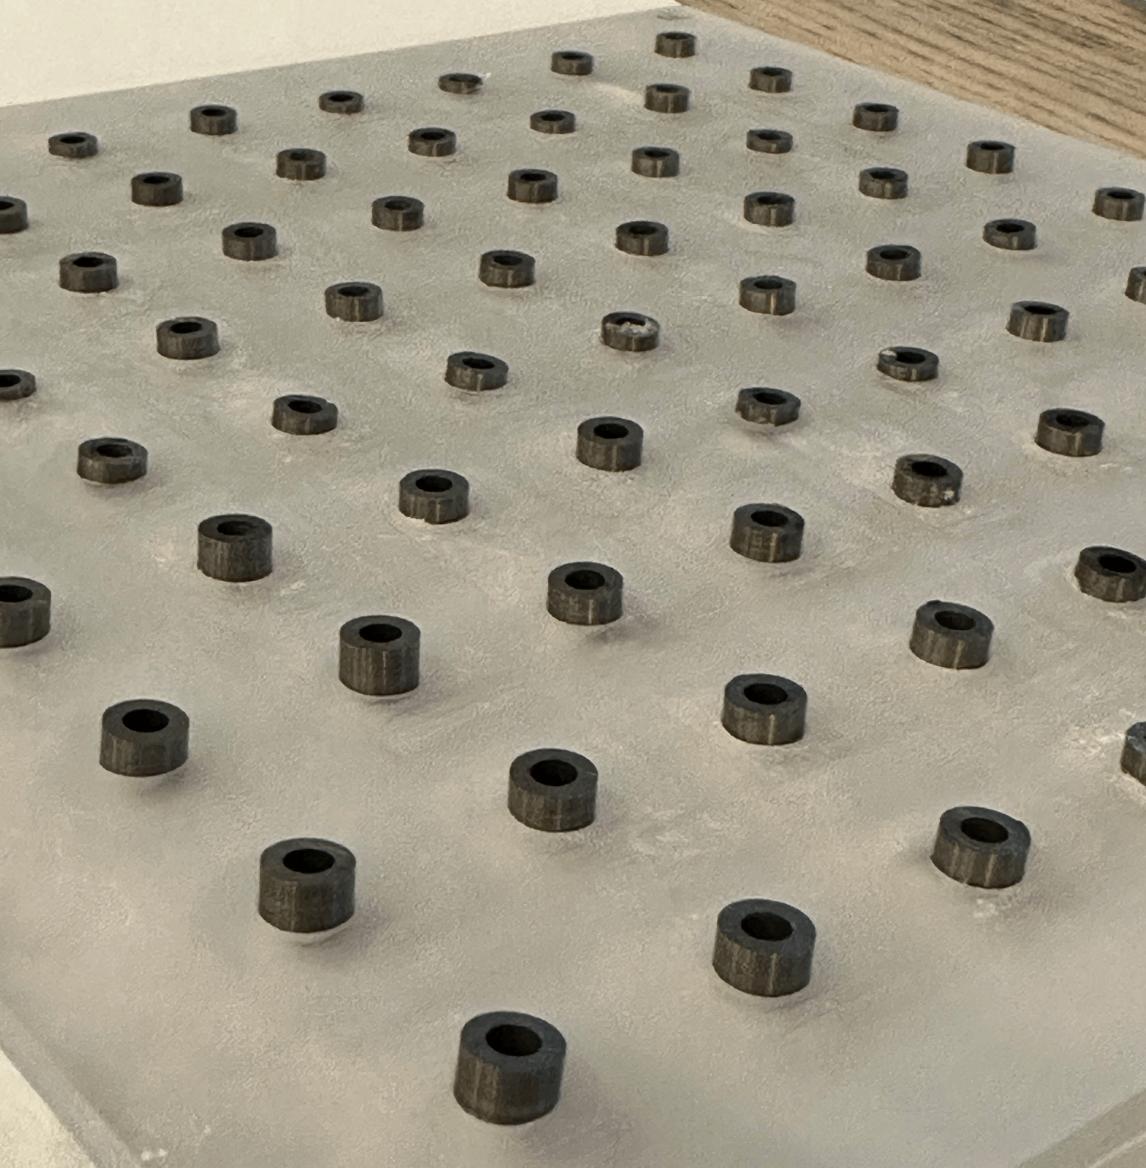 Picture of a clear 3D printed square grid with circular metal alloy segments inserted into each hole.